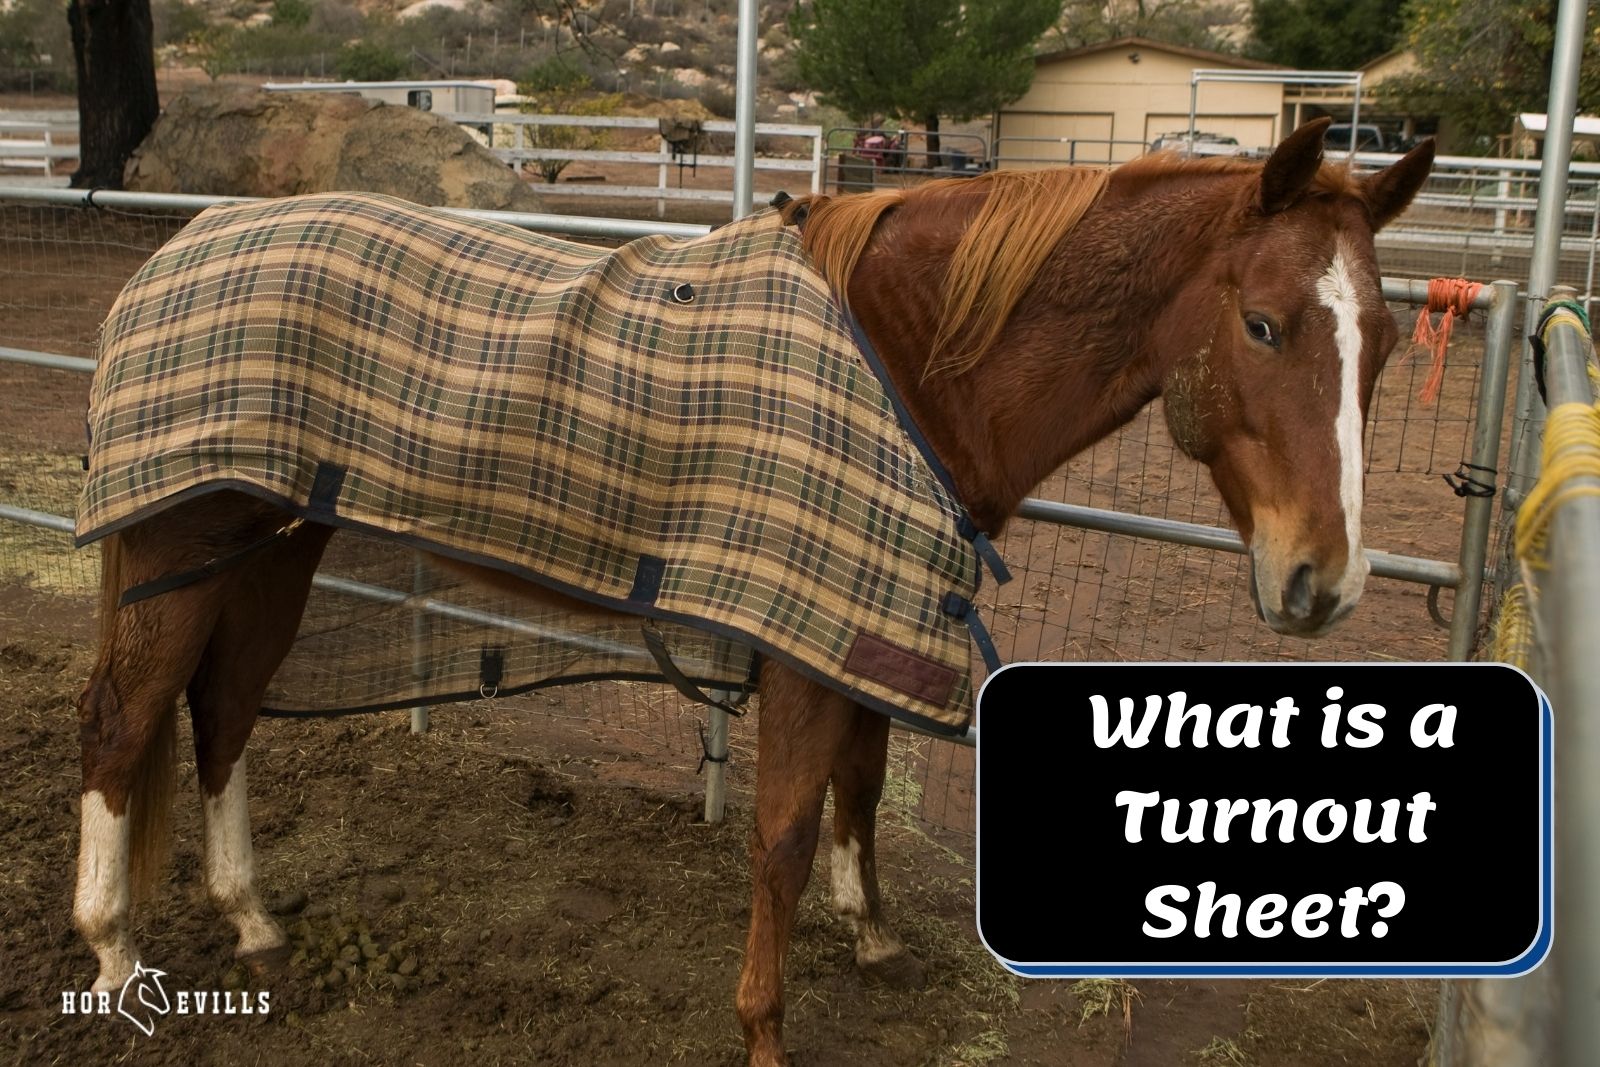 horse wearing a checkered turnout sheet but what is a turnout sheet used for?